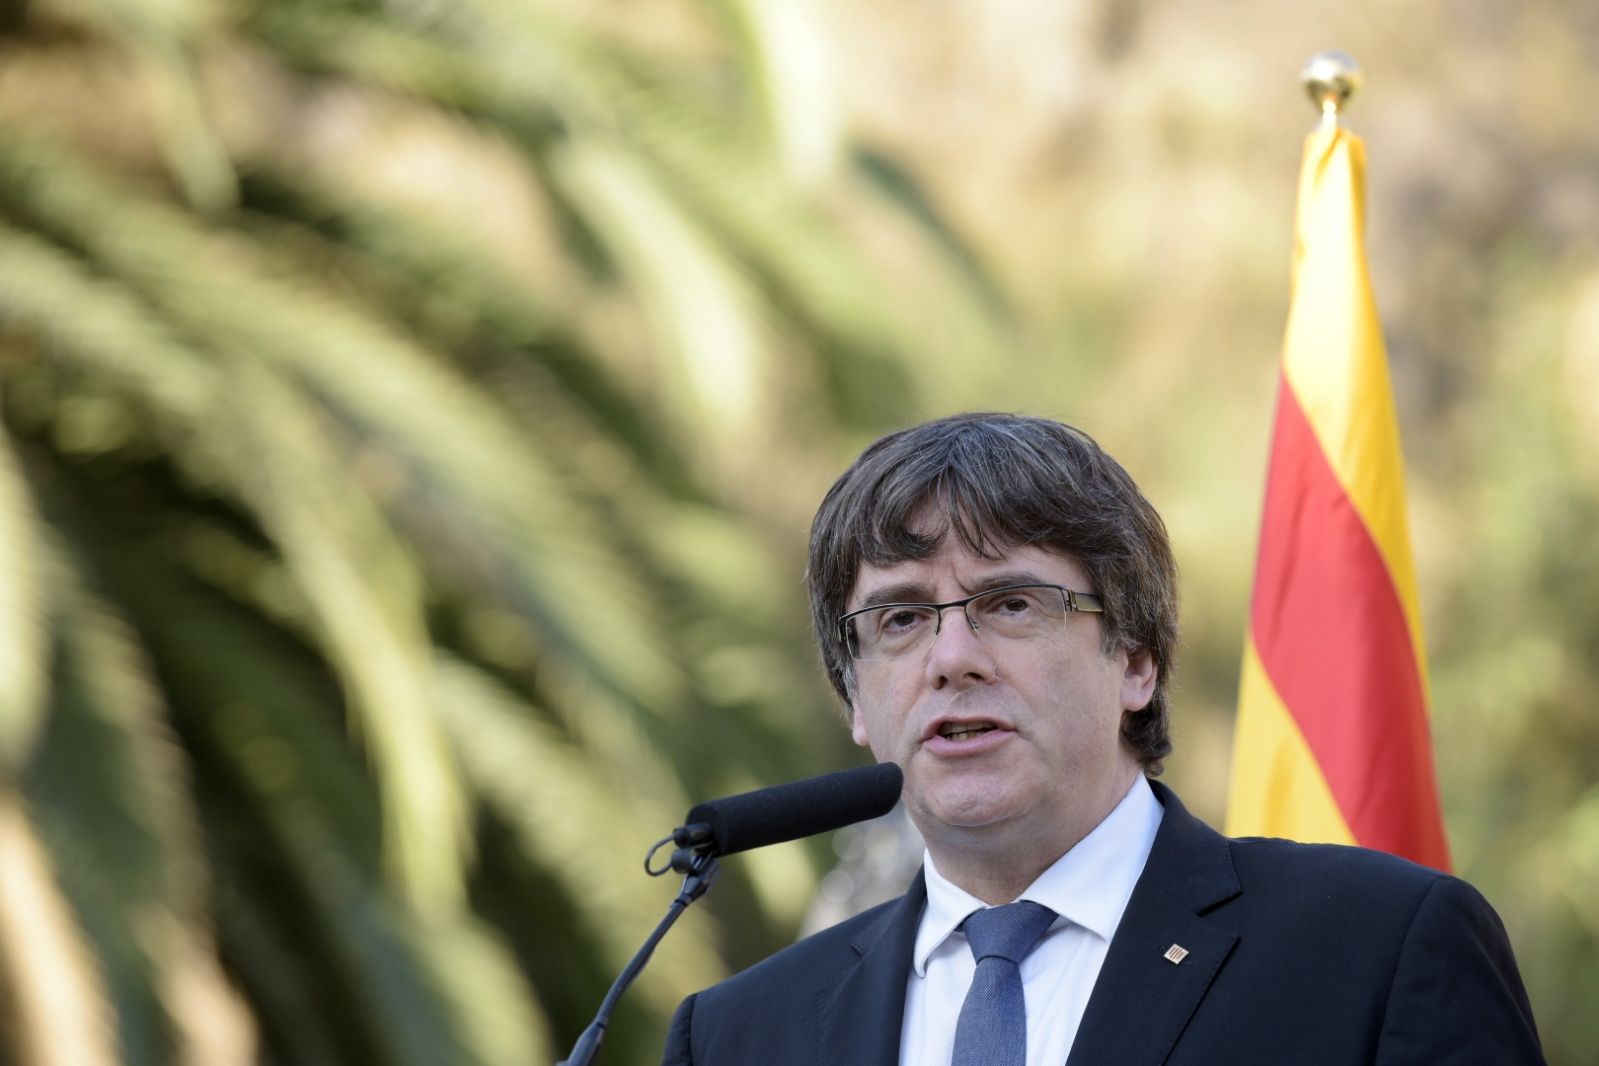 Puigdemont reflects on 1930s predecessor Companys: "He was killed in the name of the law"